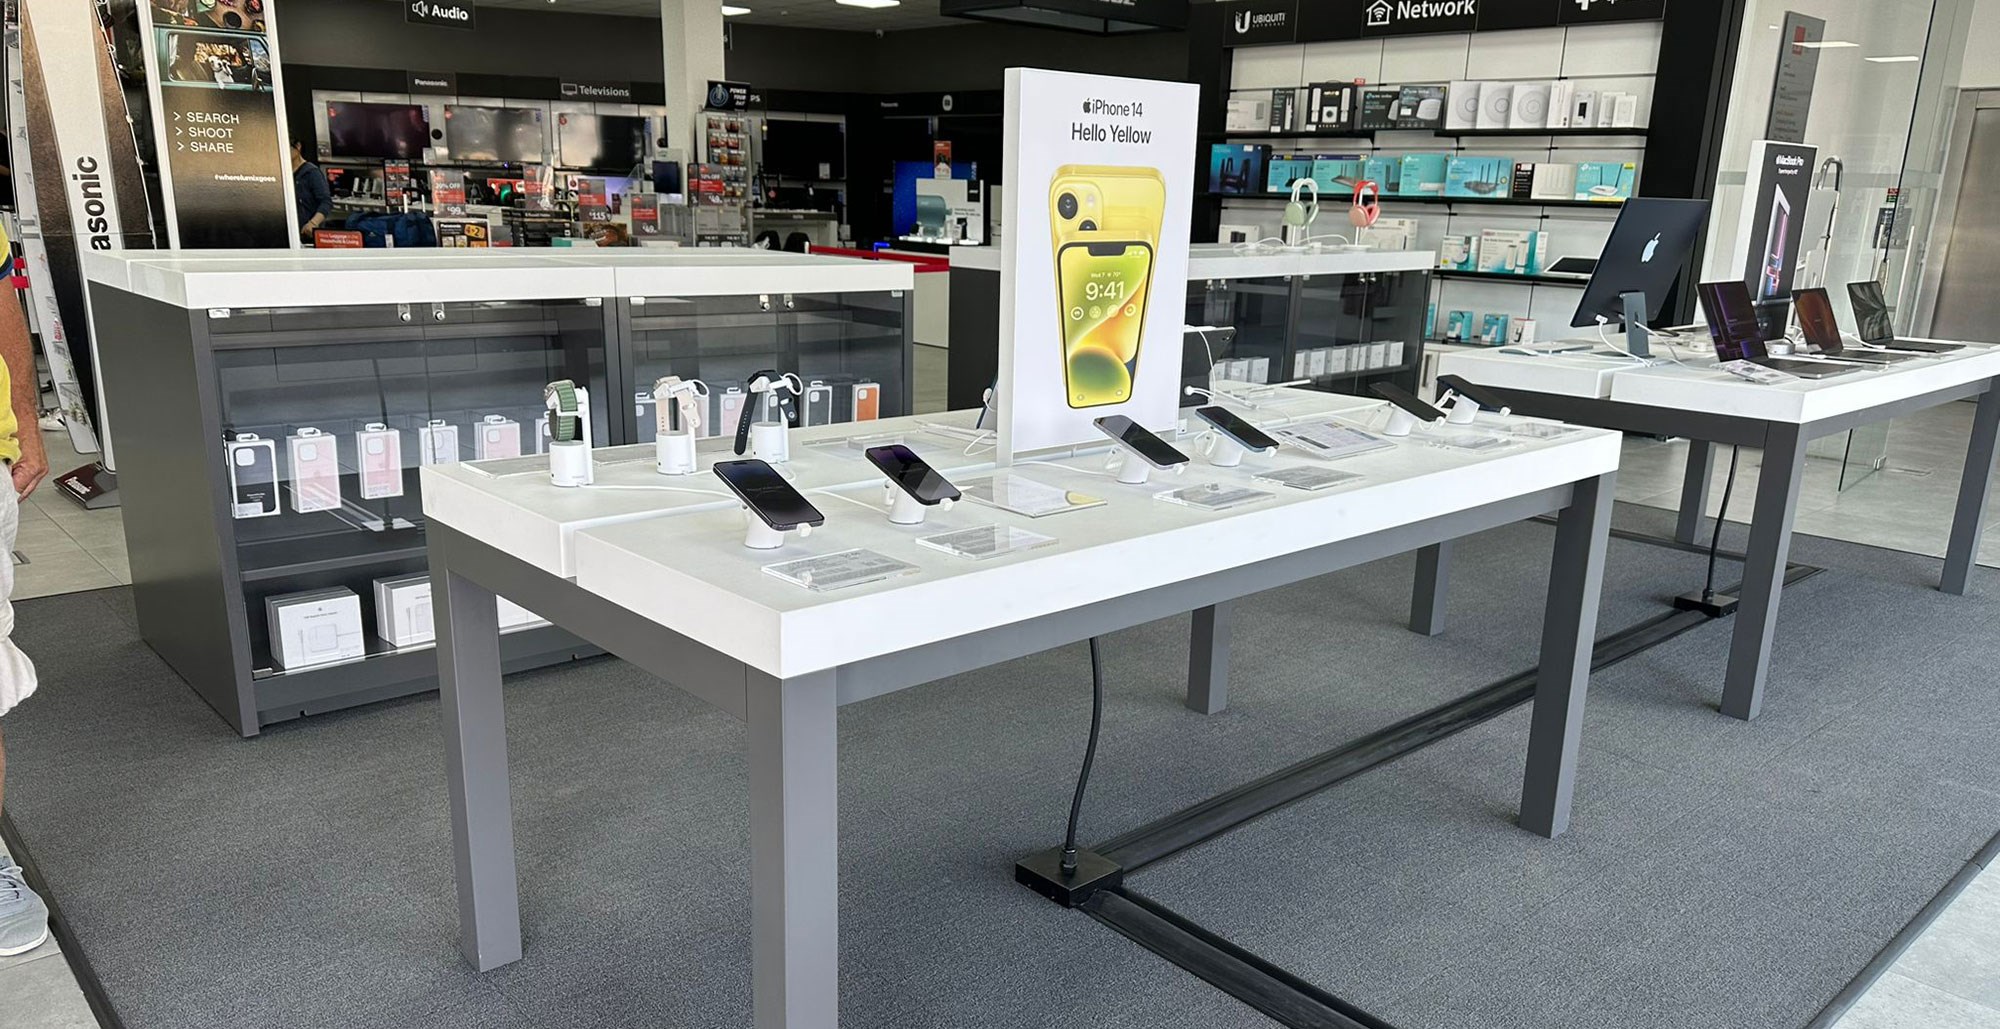 scan opens new Apple Authorized Reseller in Malta